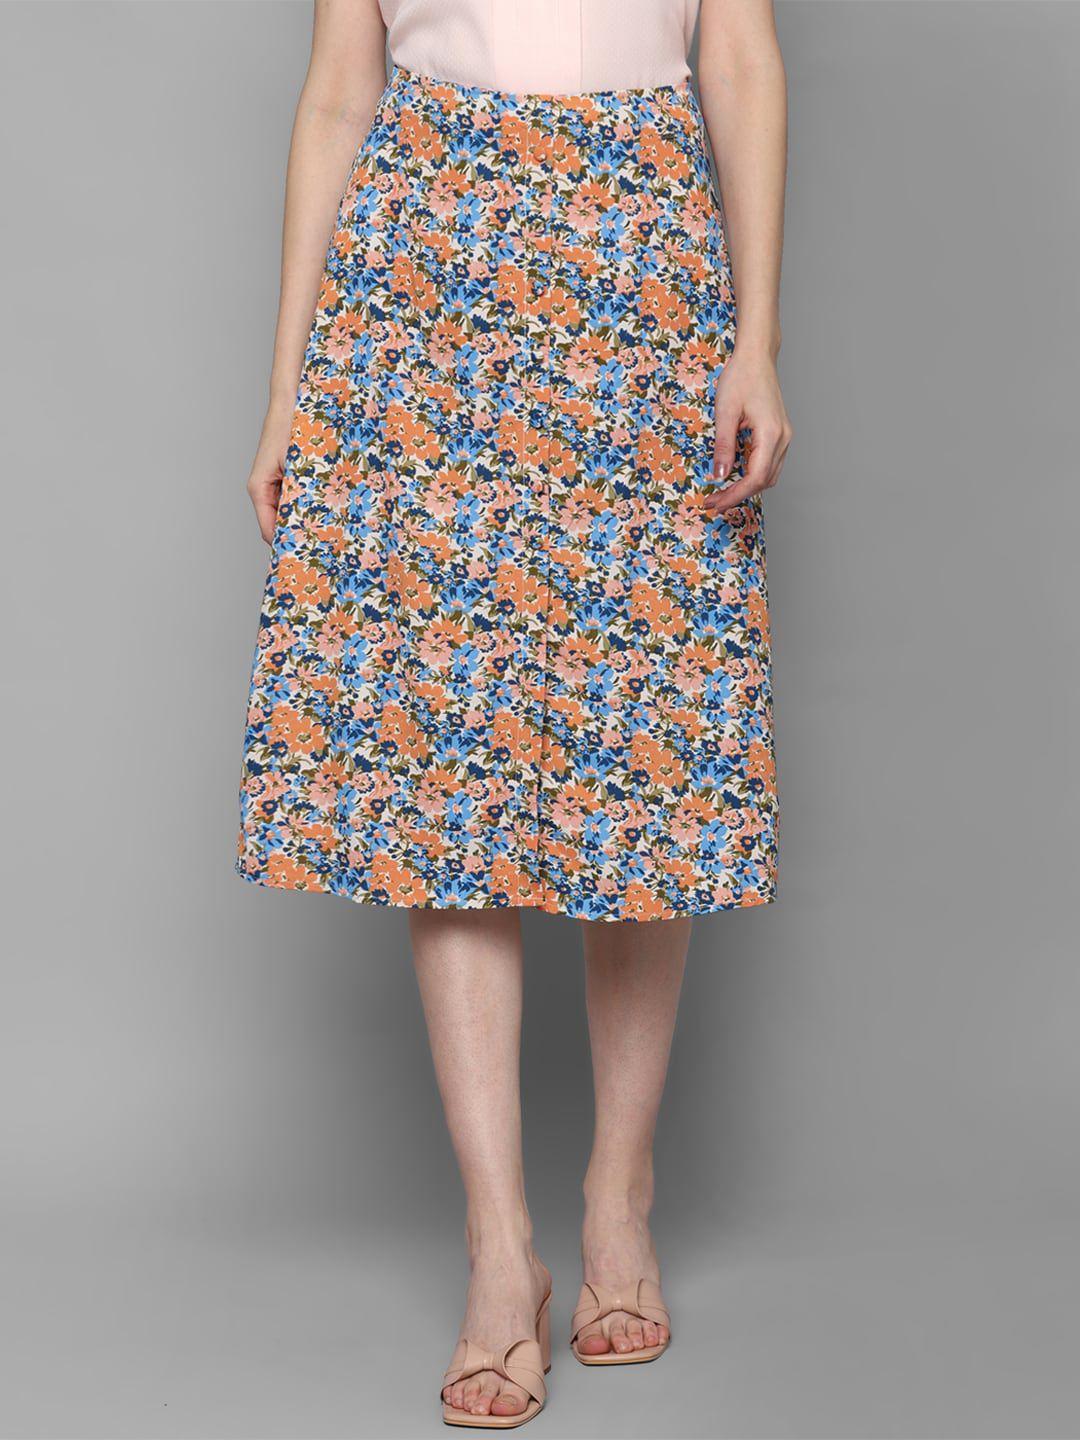 allen solly woman blue & orange printed a-line knee length skirts